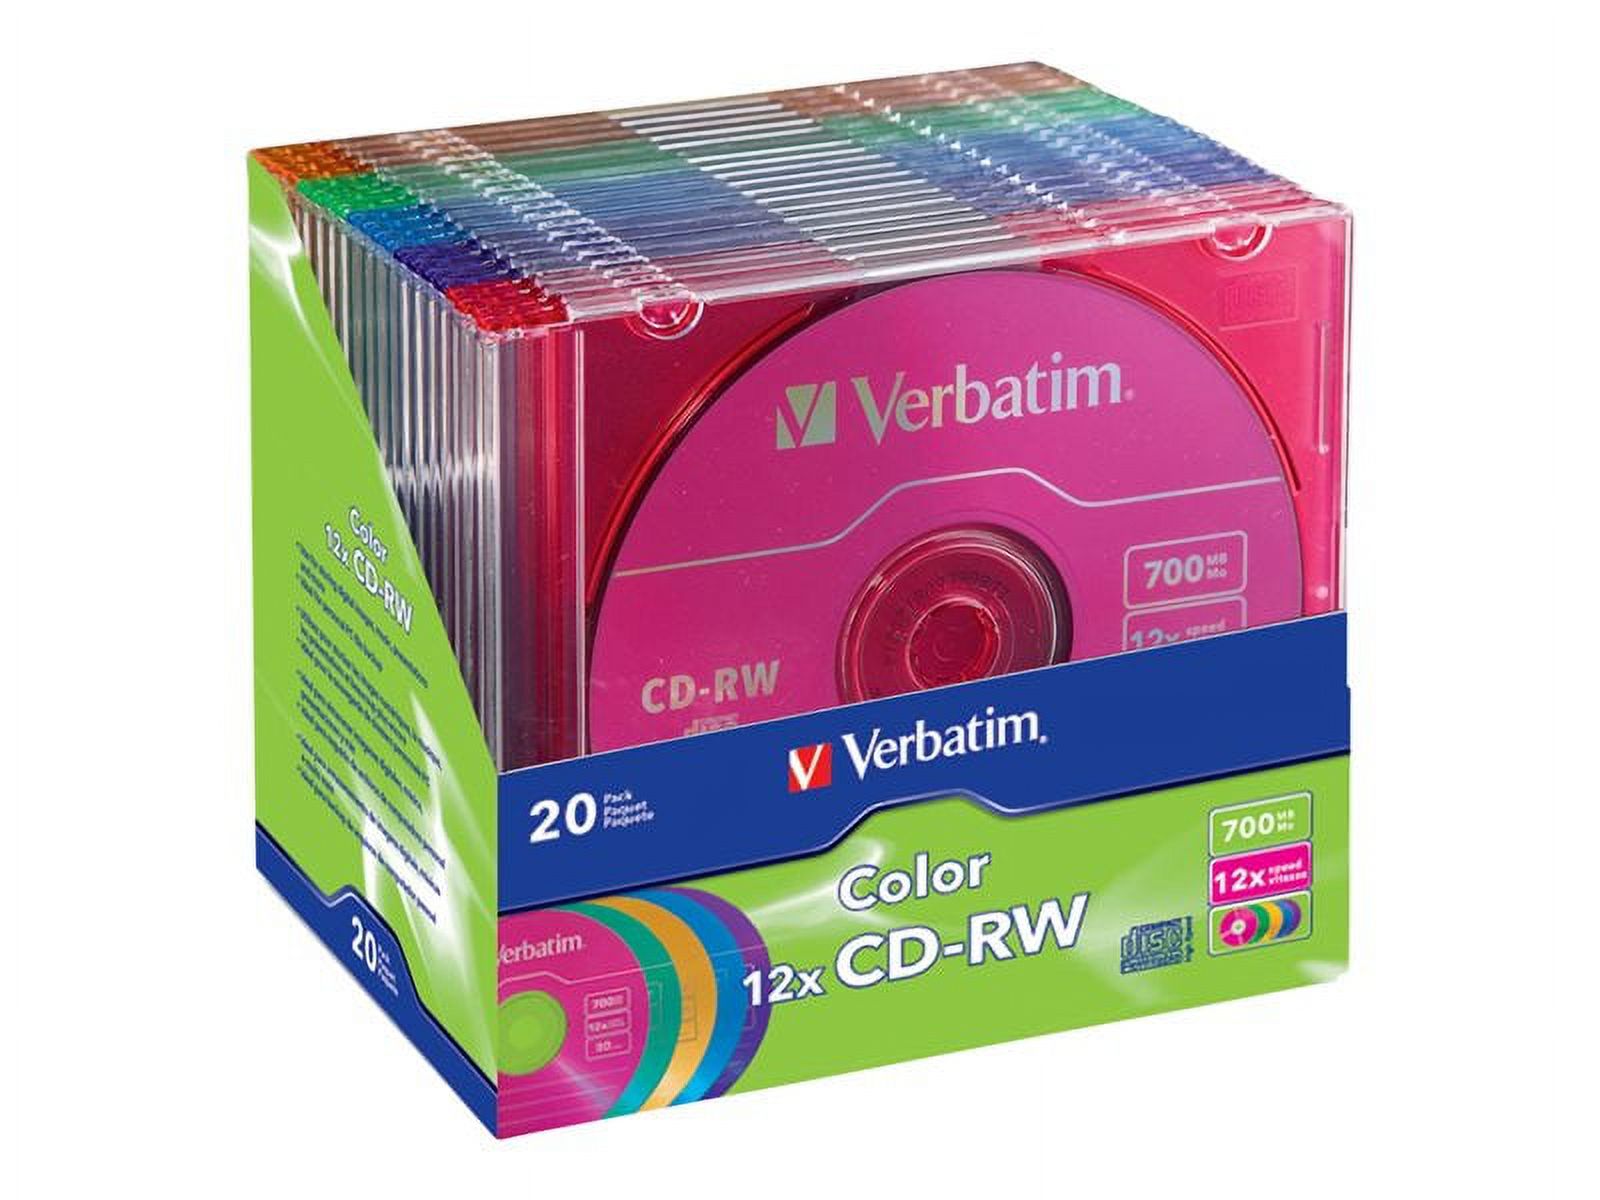 Verbatim 96685 Verbatim CD-RW 700MB 4X-12X DataLifePlus with Color Branded Surface and Matching Case - 20pk Slim Case, Assorted - image 1 of 2